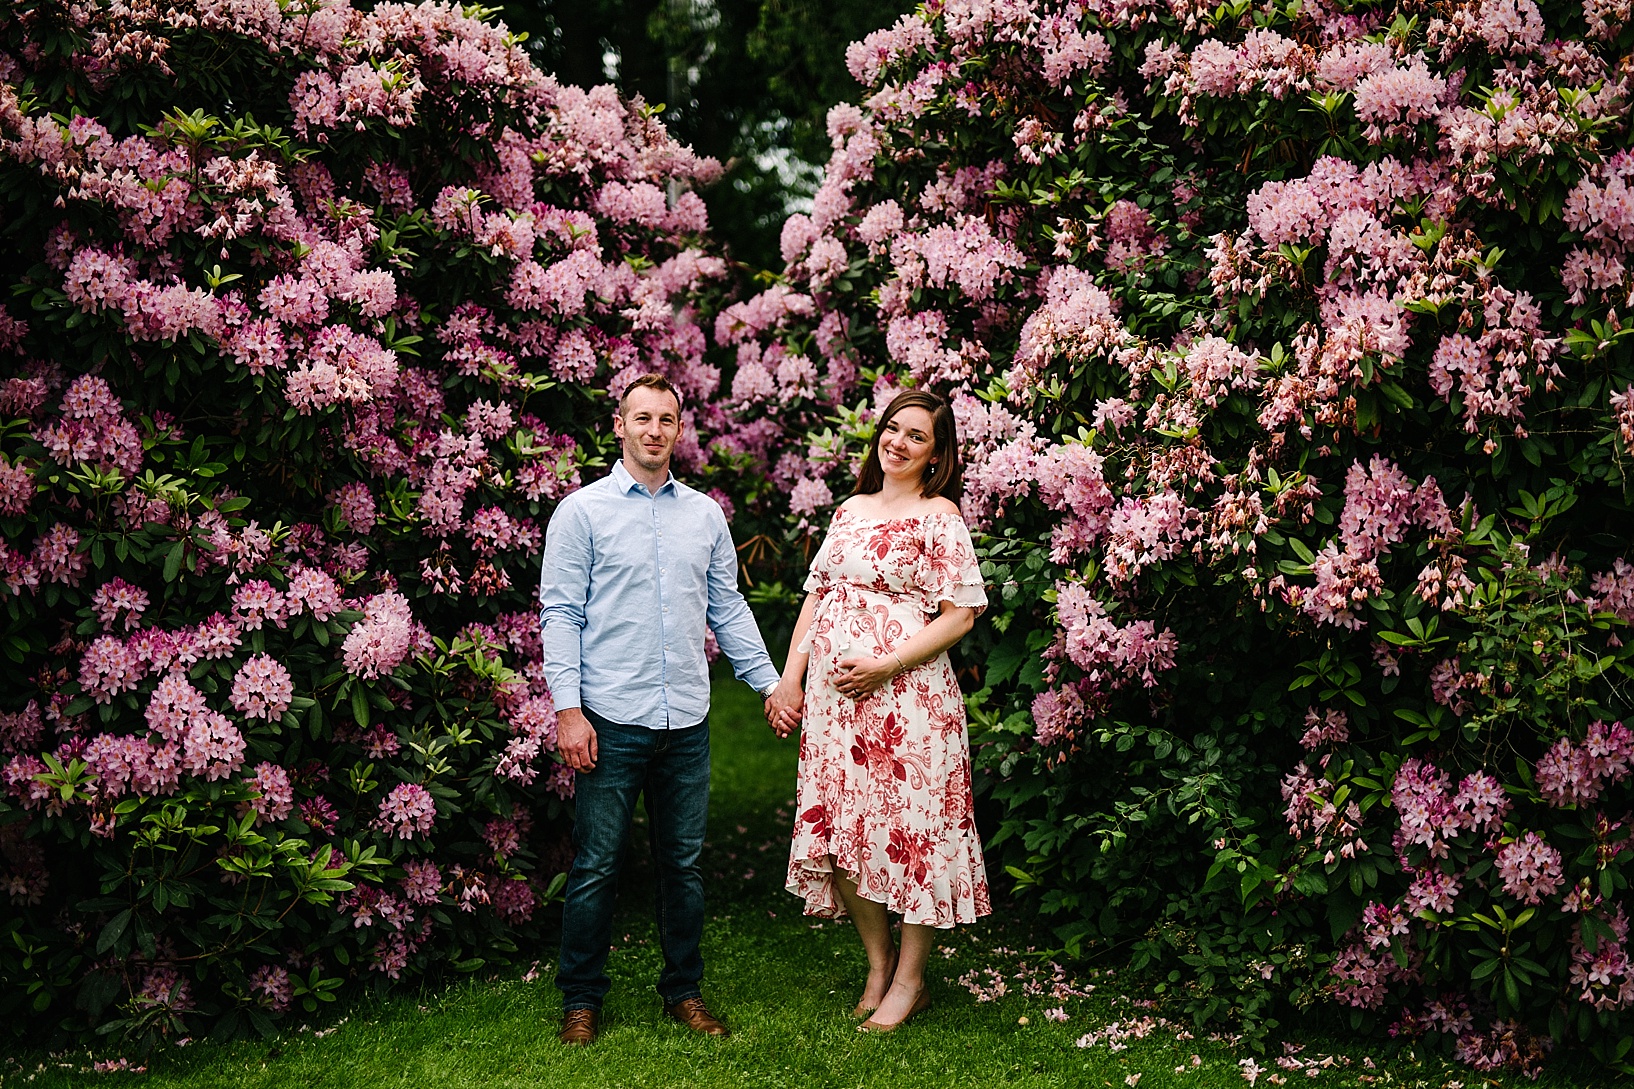 Husband and pregnant wife hold hands in front of giant pink flower bushes during rainy maternity session